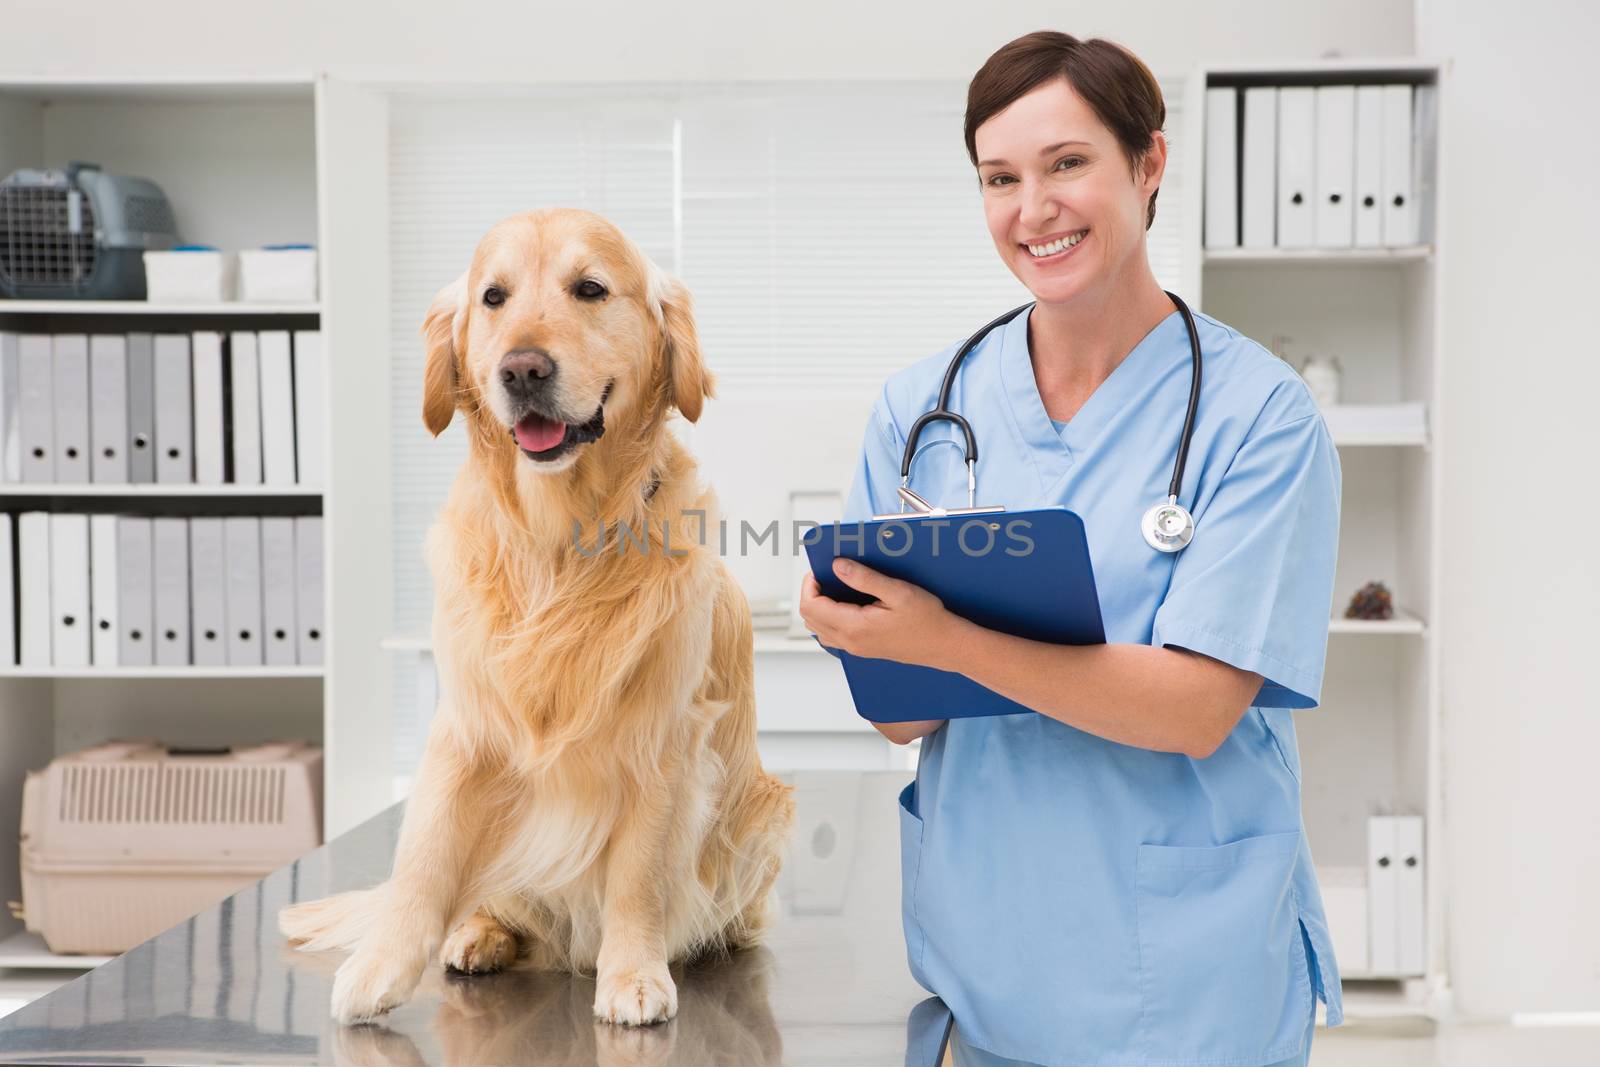 Vet examining a dog and writing on clipboard by Wavebreakmedia